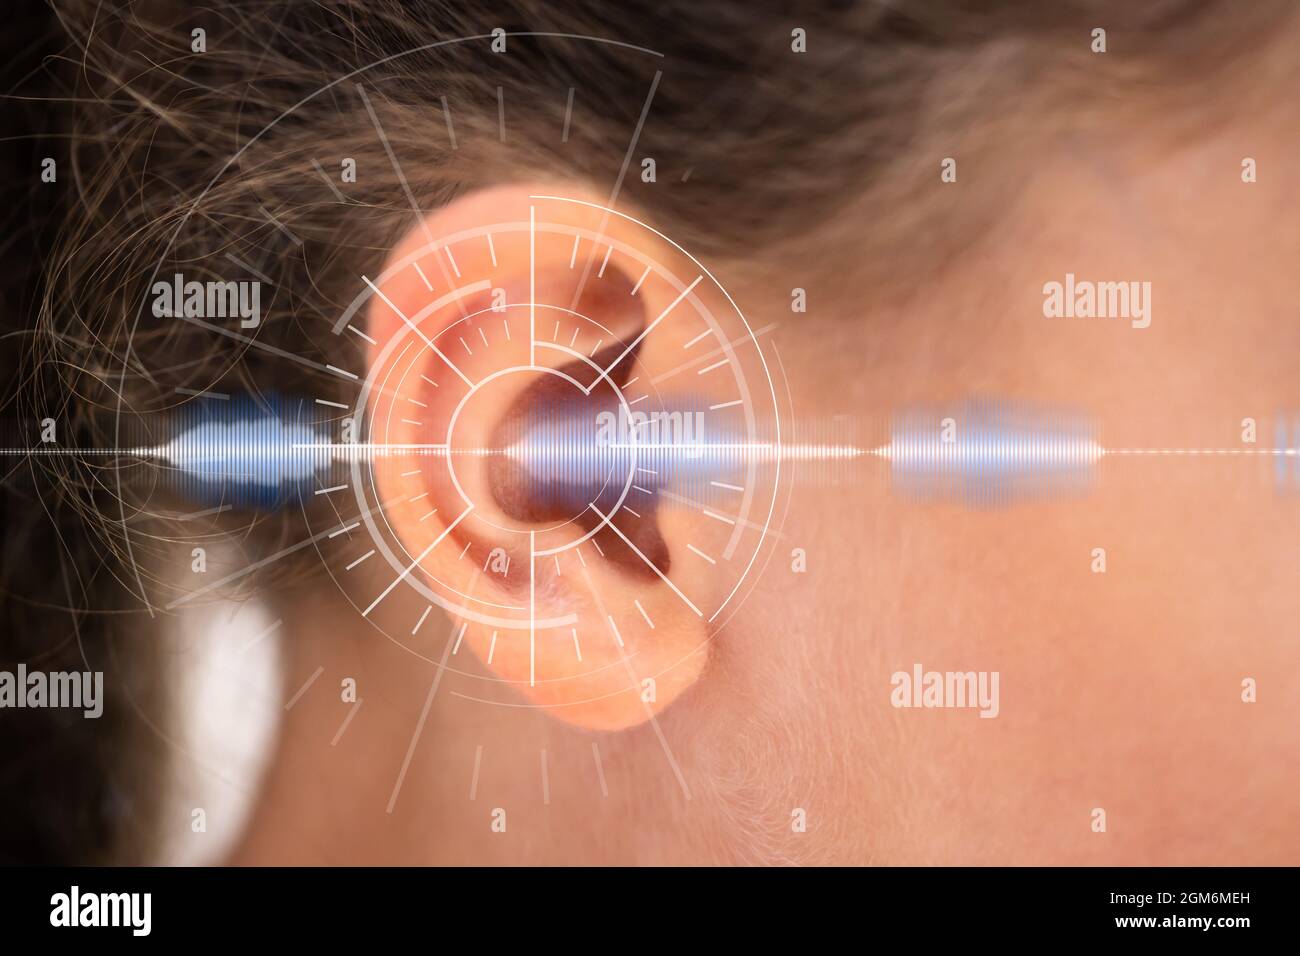 Hearing Aid For Deaf Children. Kid Ear Sound Stock Photo